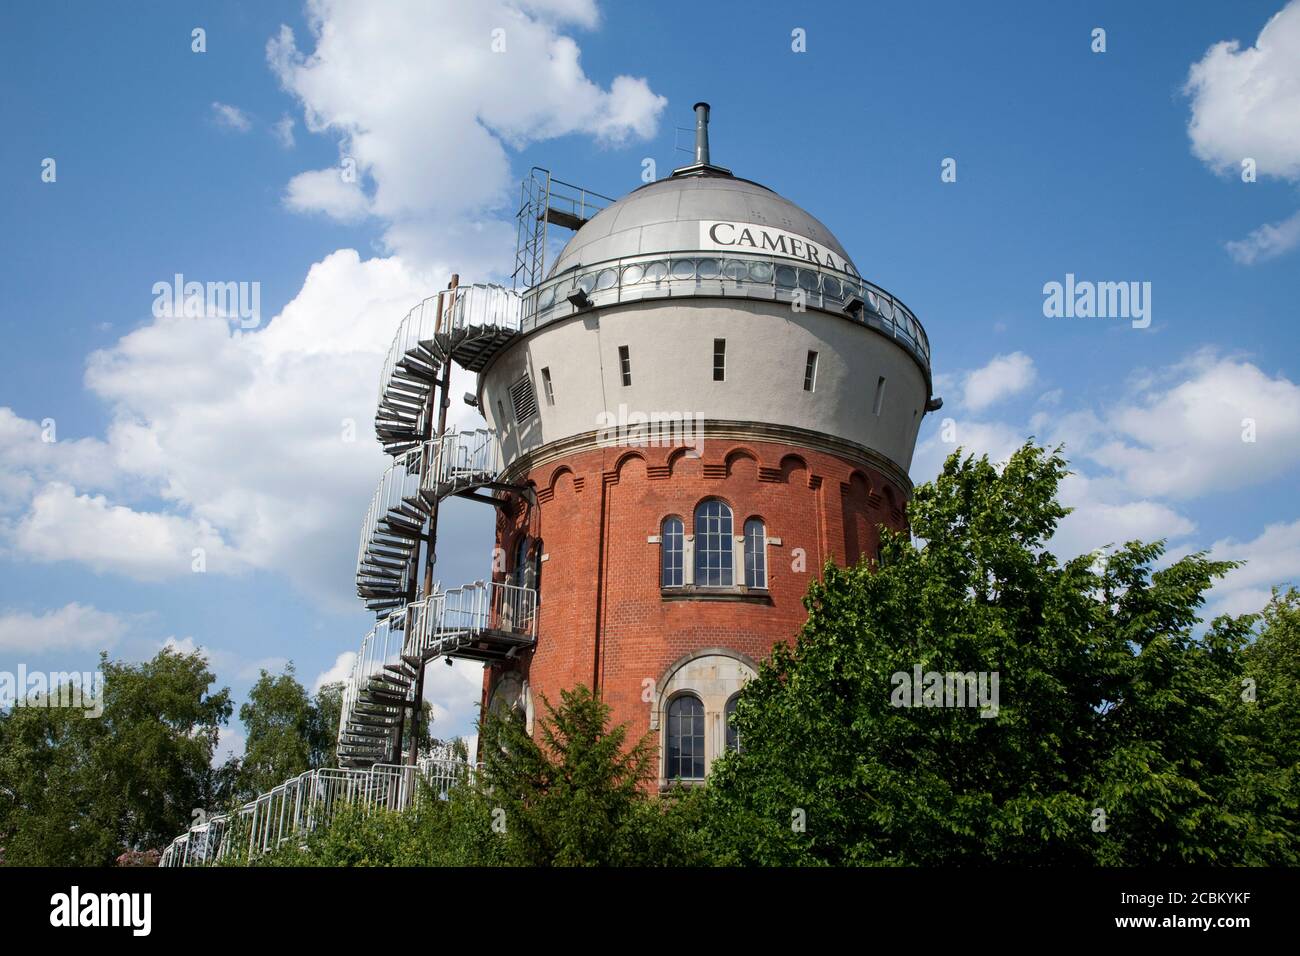 Image Museum, Camera Obscura, Water Tower, Mulheim an der Ruhr, Germany Stock Photo